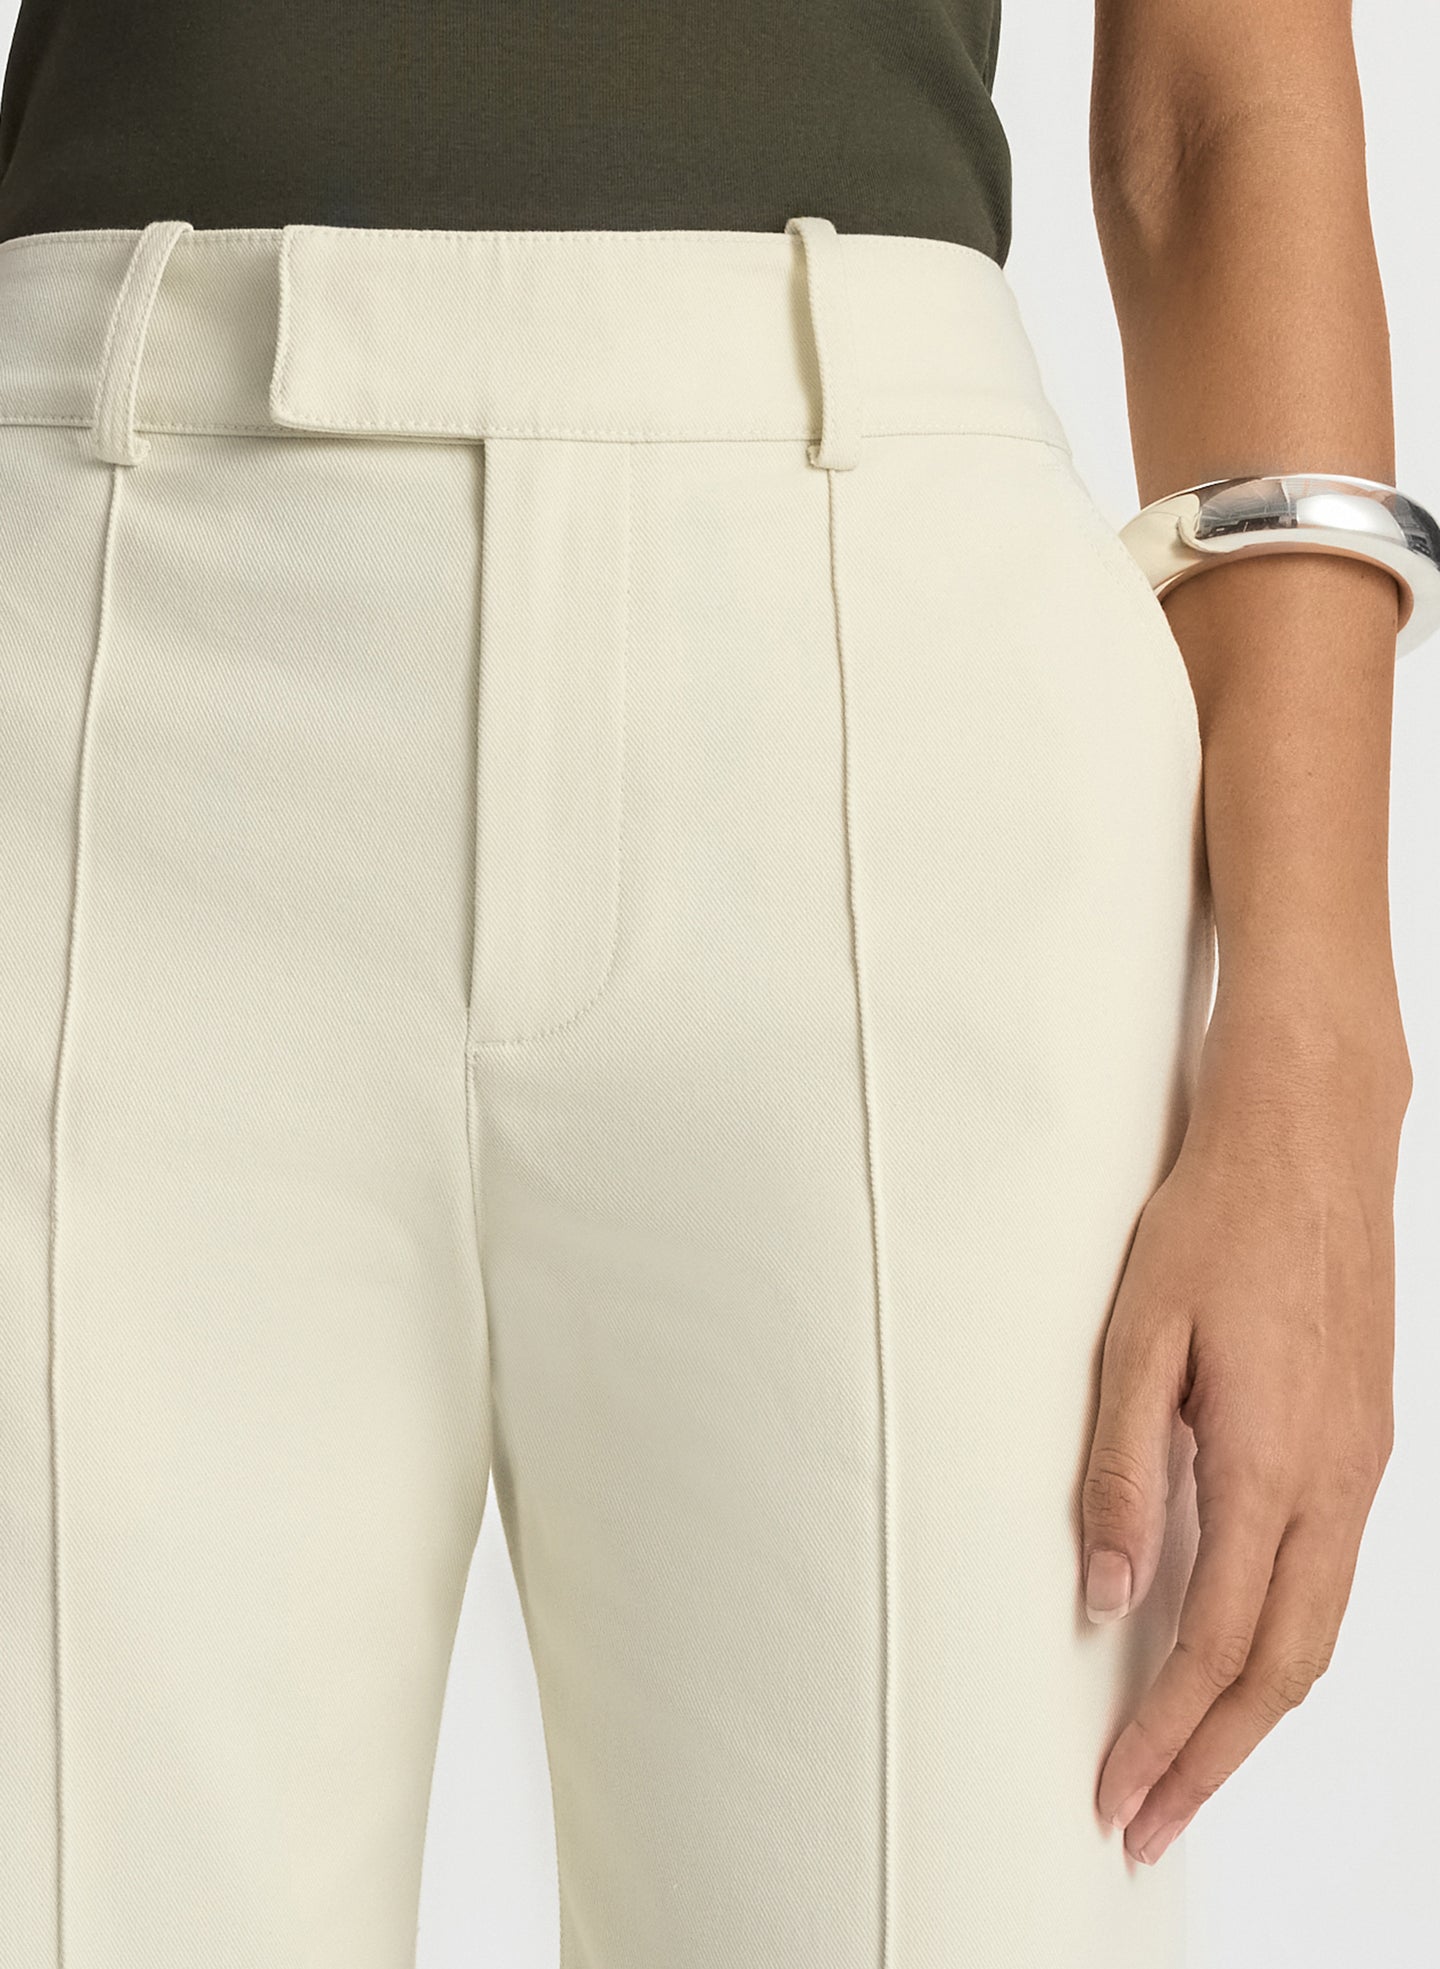 detail view of woman wearing olive green sleeveless top with cream wide leg pants